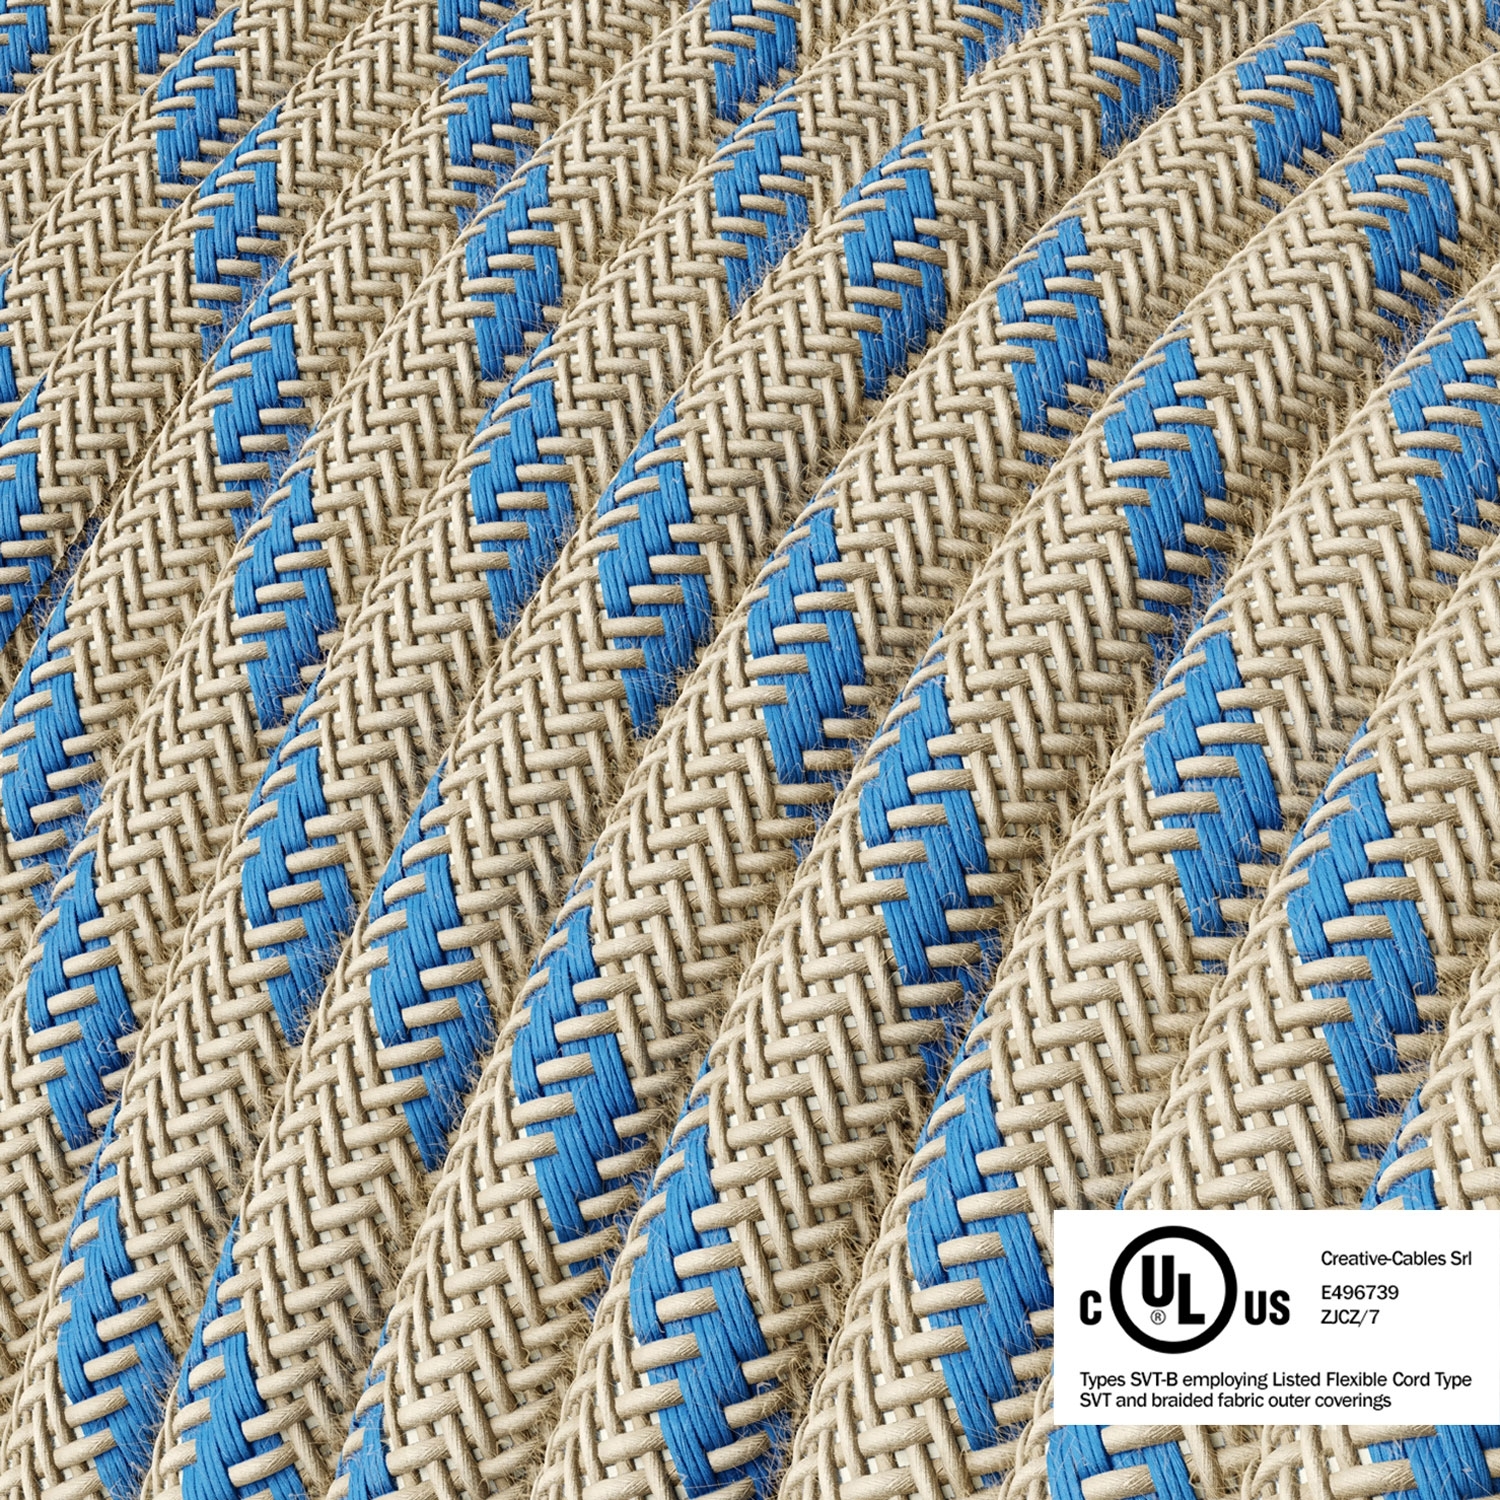 Natural & Blue Linen Stripe covered Round electric cable - RD55